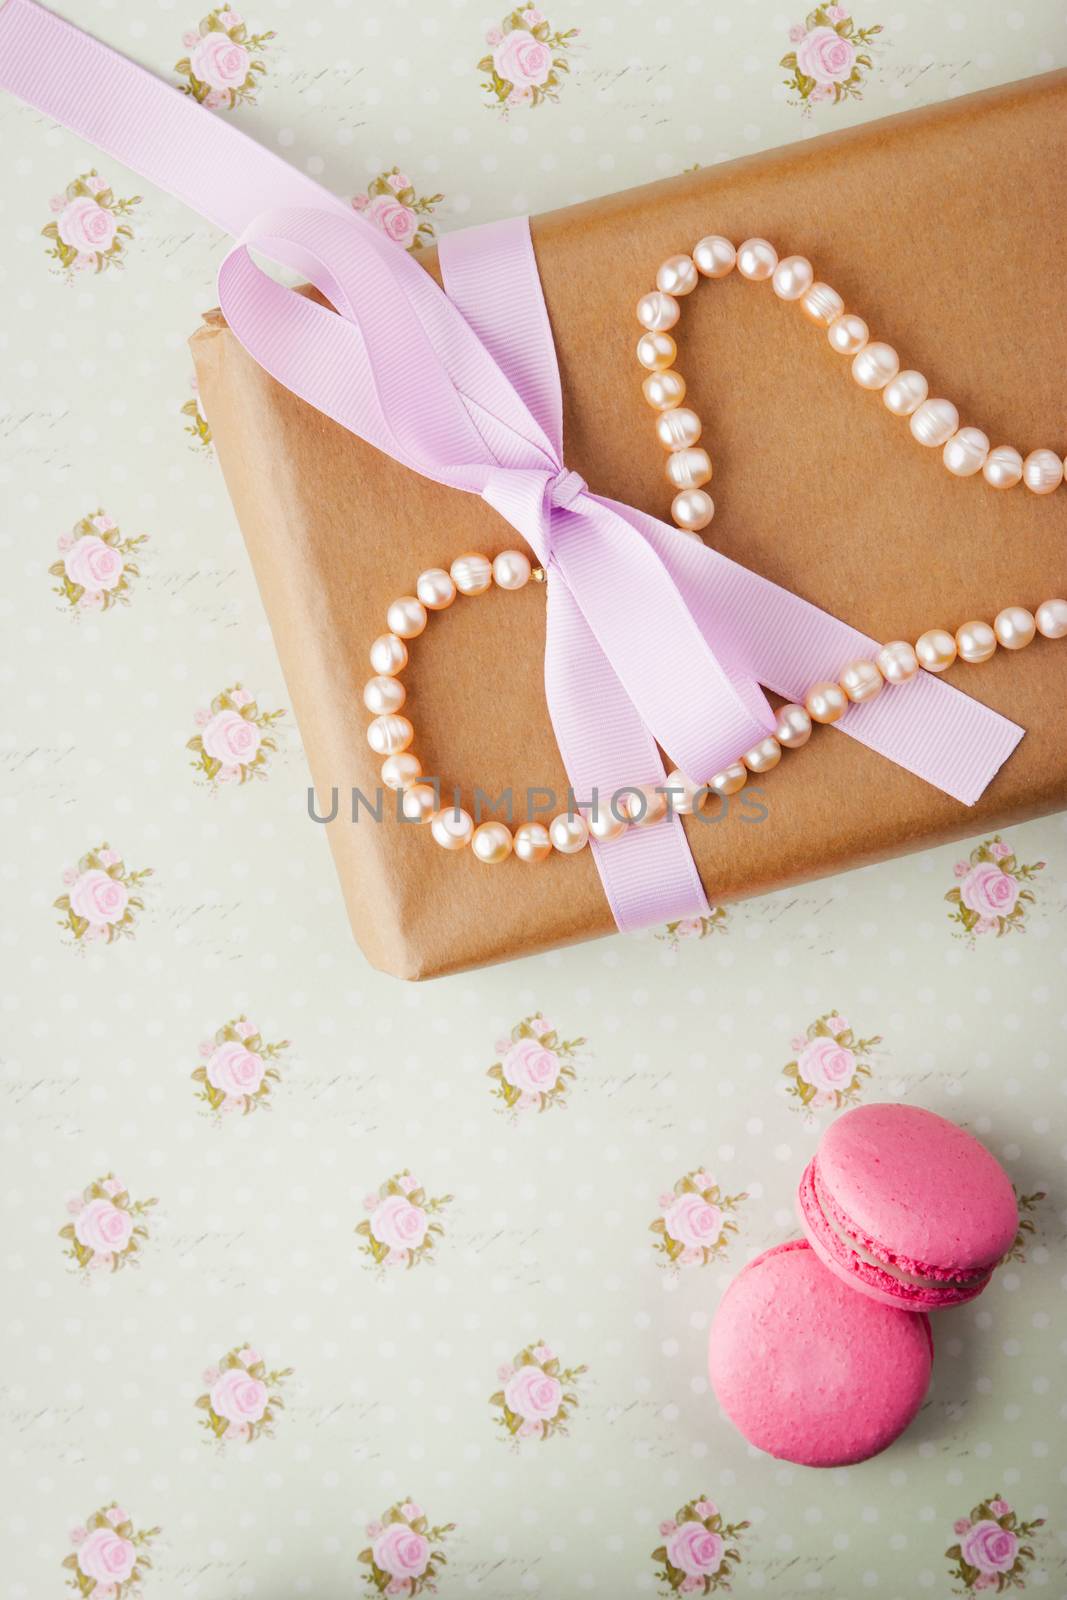 Gift box with pearls in a romantic vintage style in pastel color by Deniskarpenkov